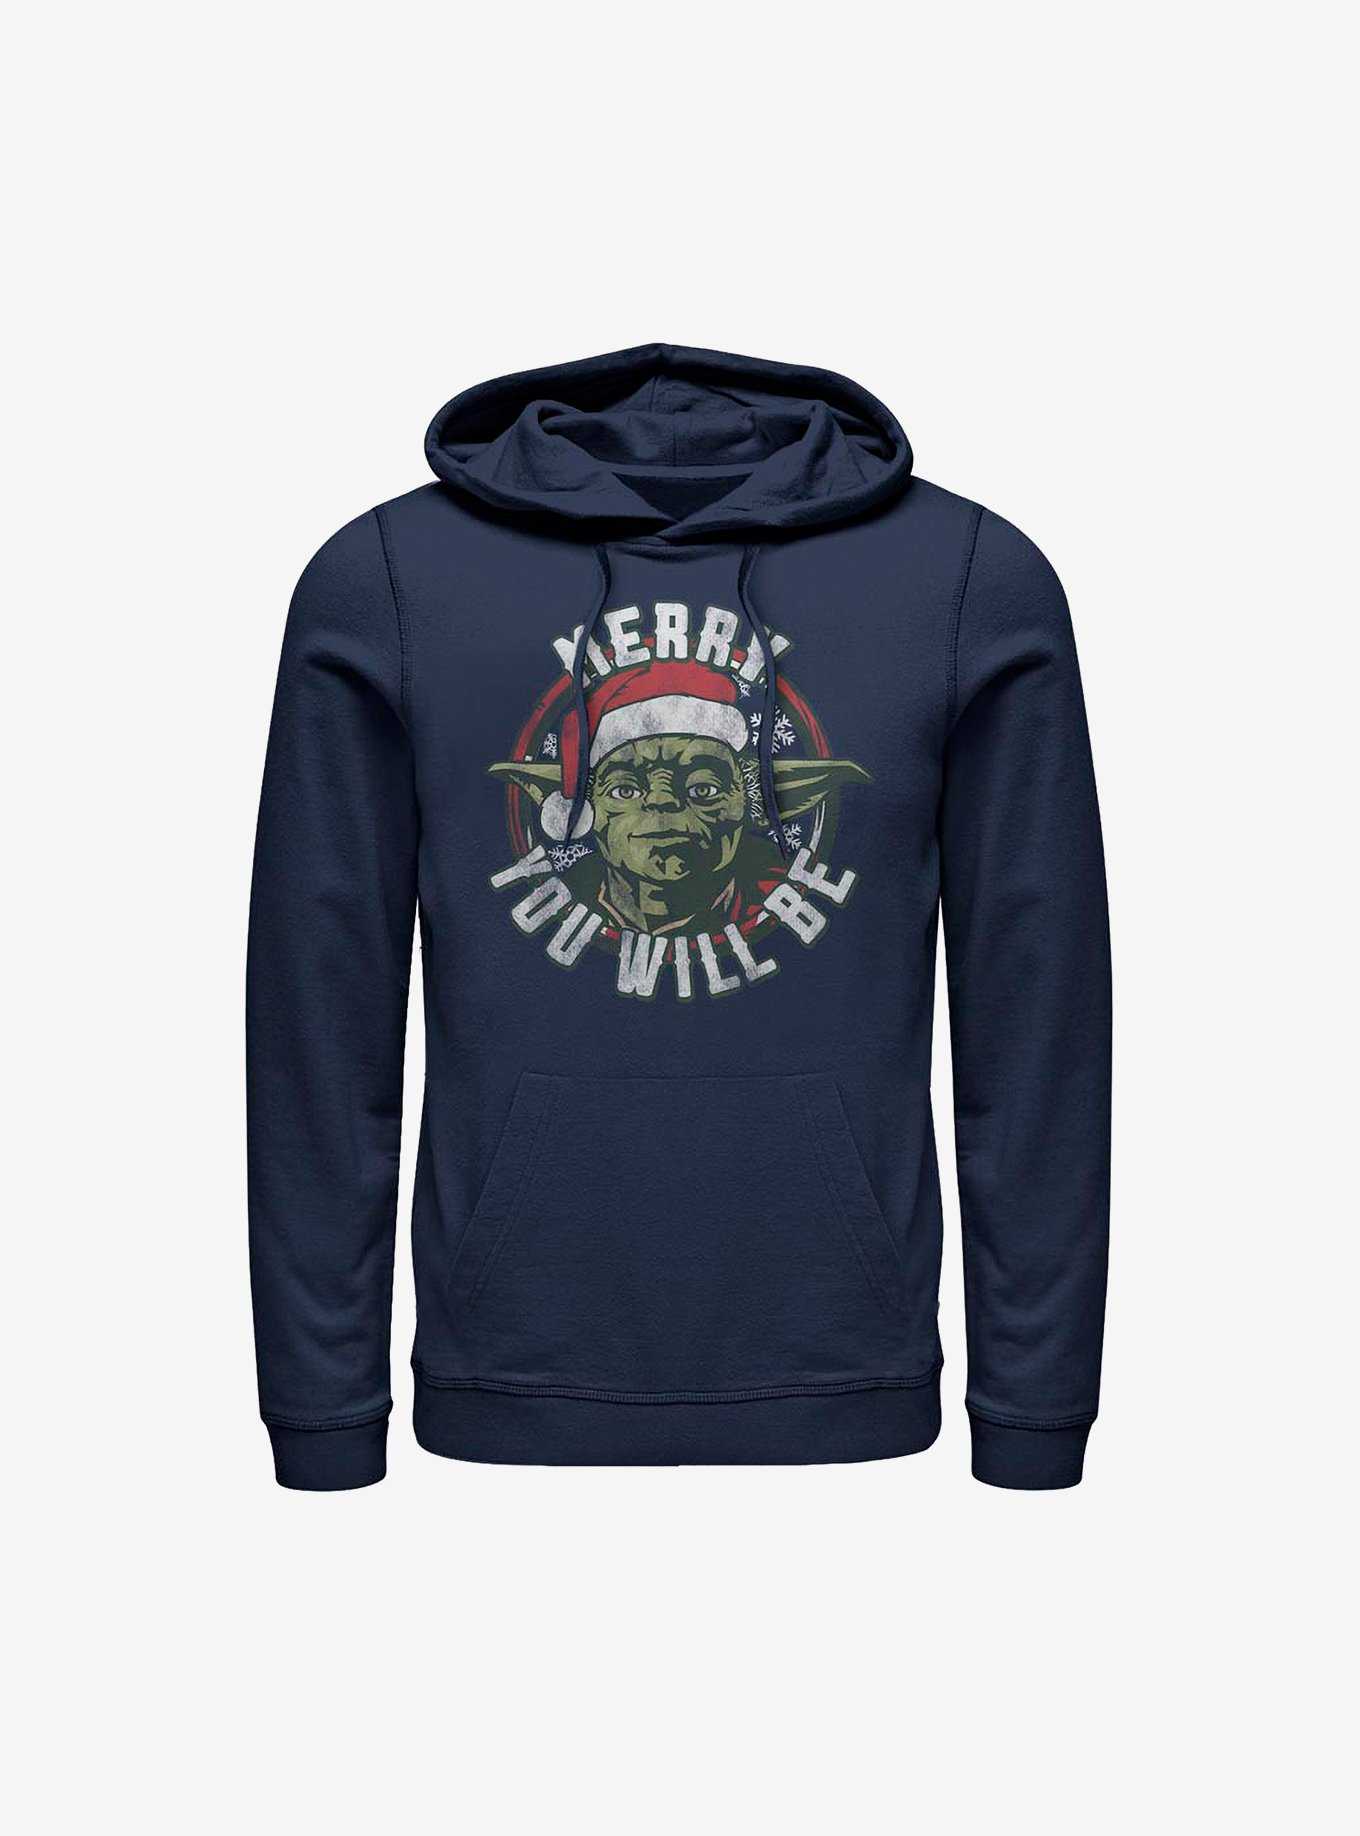 Star Wars Merry You Will Be Holiday Hoodie, , hi-res